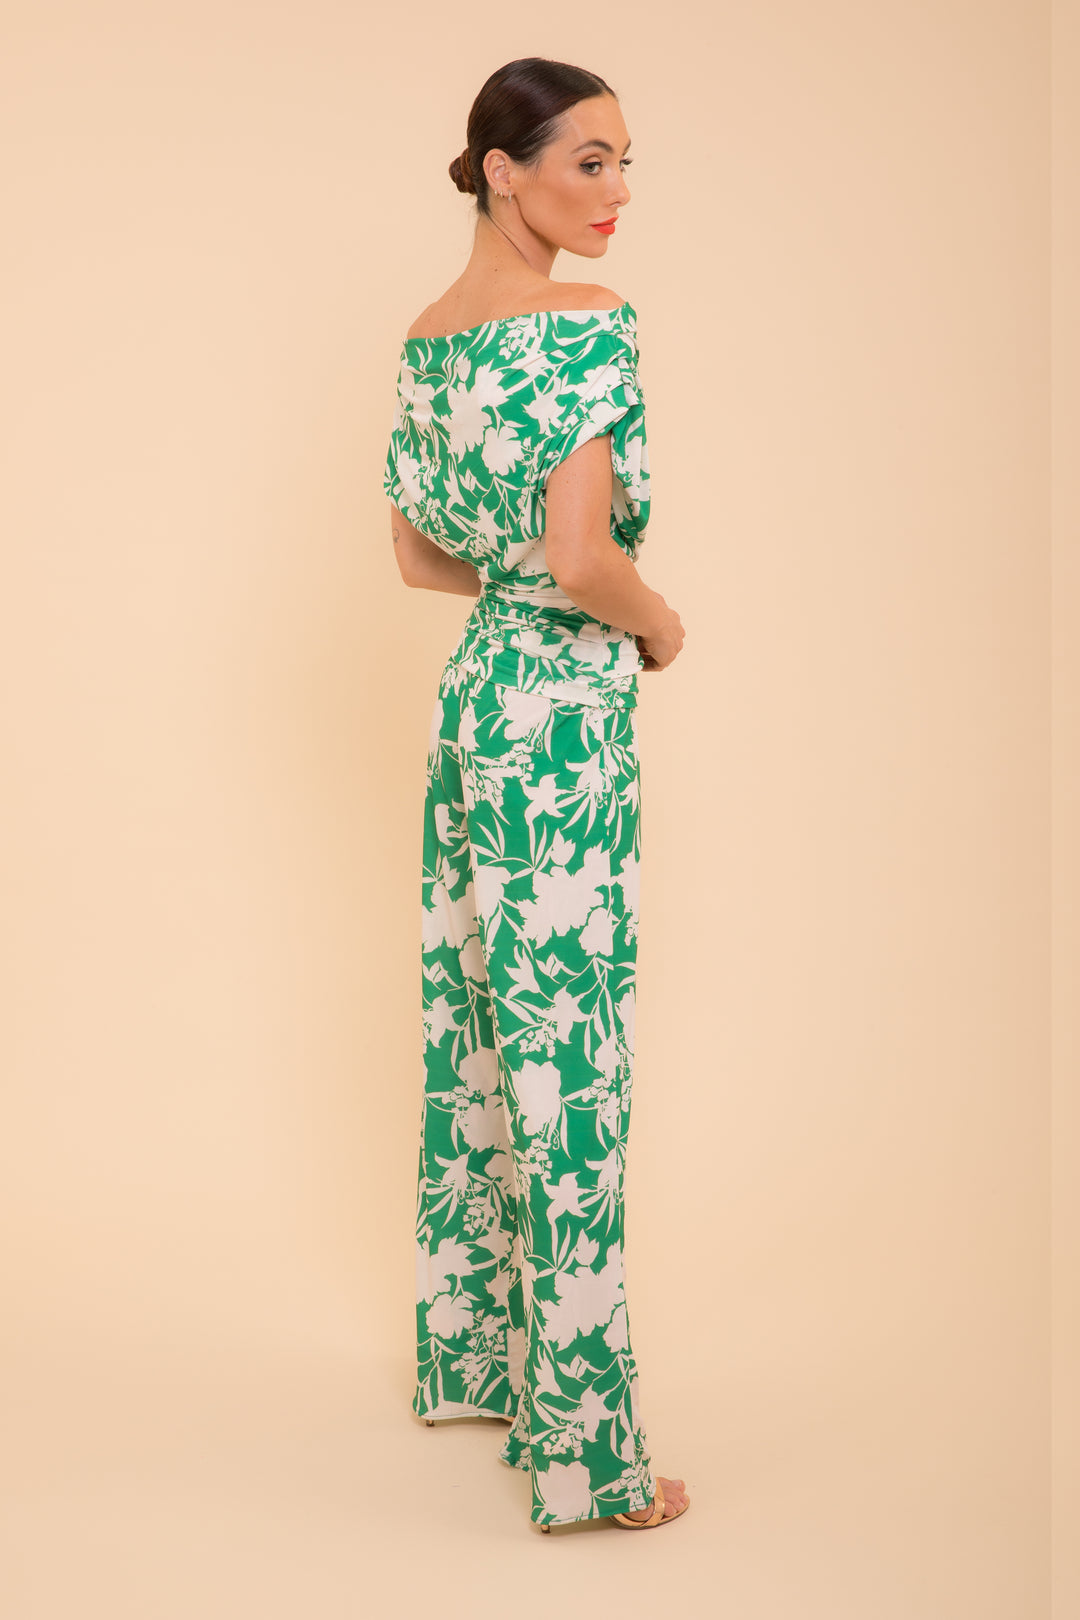 ATOM LABEL carbon jumpsuit in green & ivory print